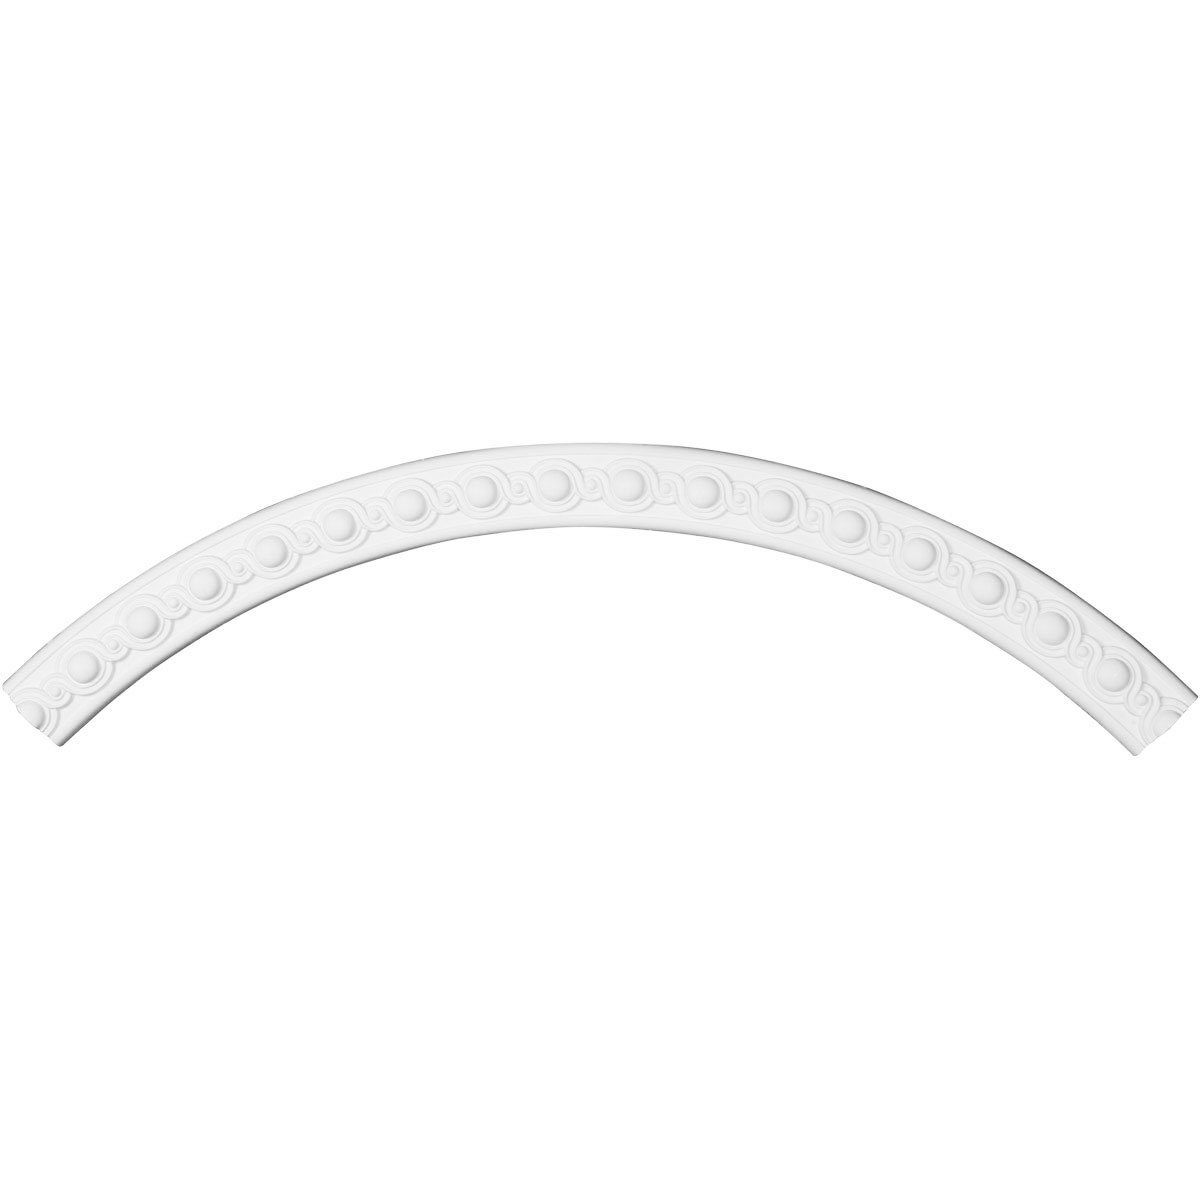 59.13 X 53.13 X 3 X 1 In. Hillsborough Ceiling Ring - 0.25 Of Complete Circle